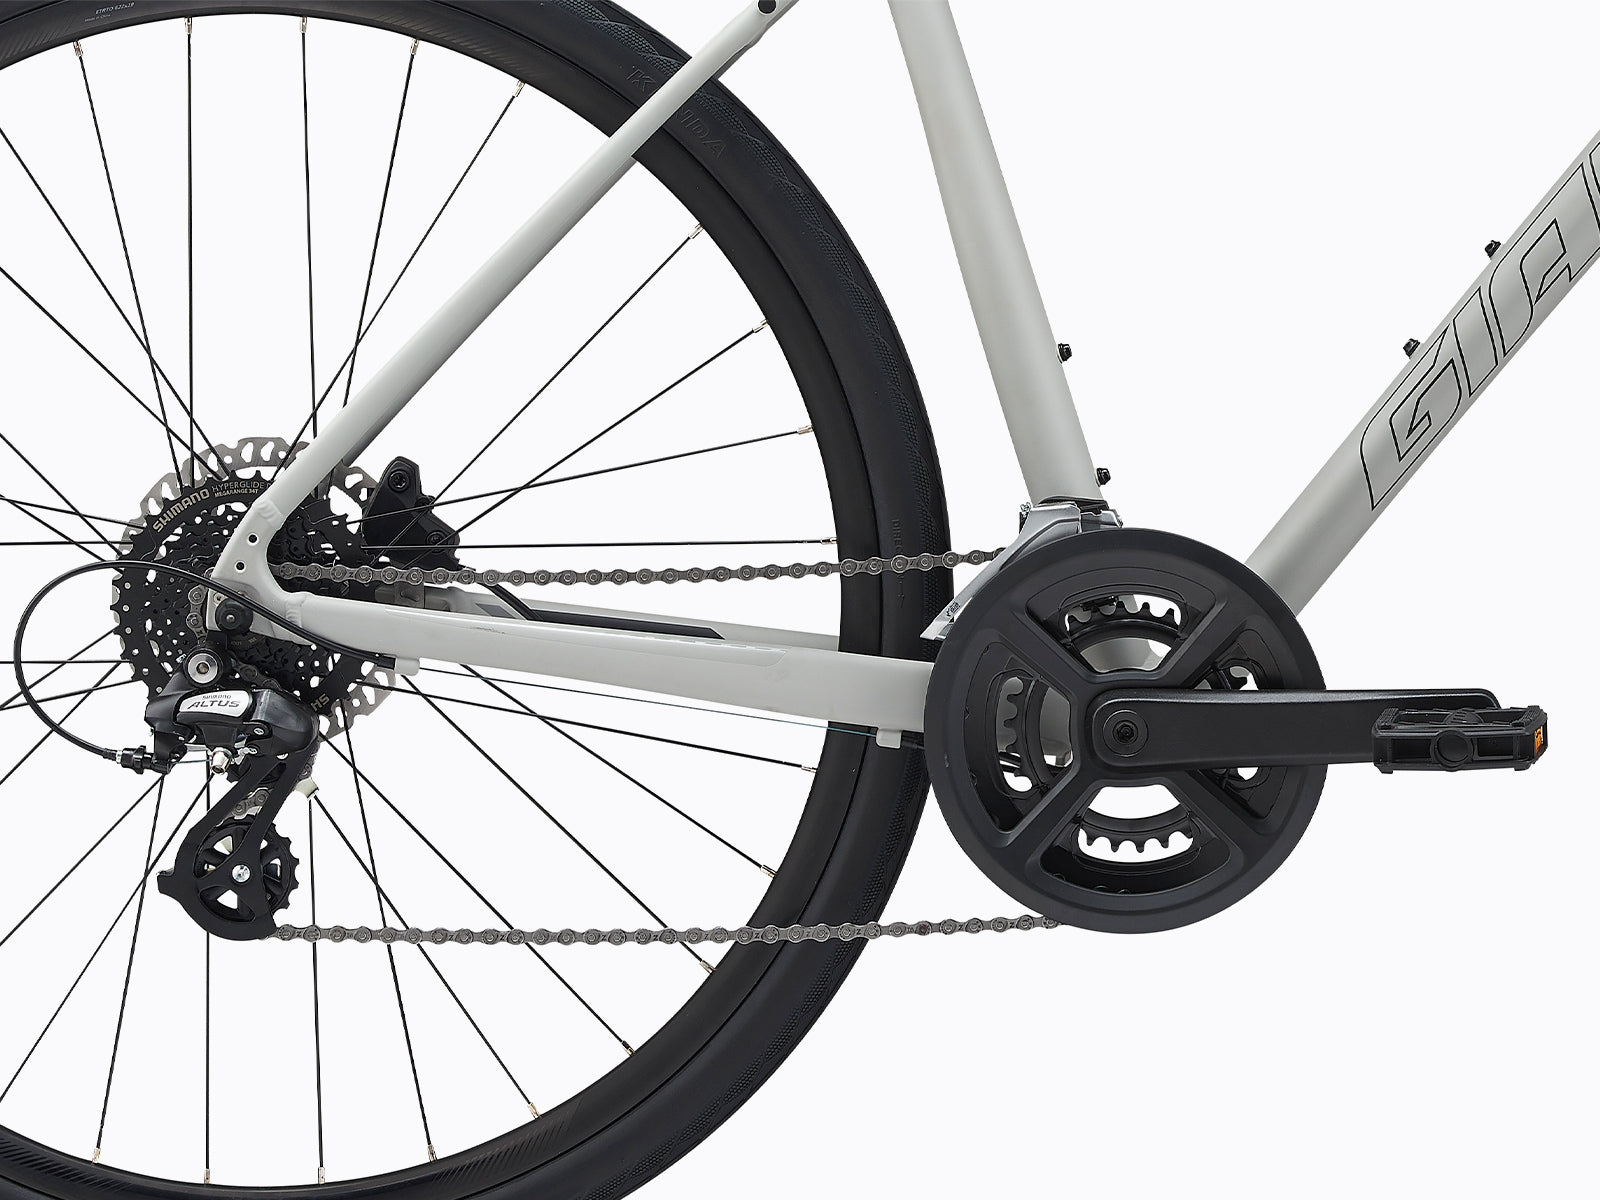 image features a Giant Cross City 2 Disc, a city bike designed for cyclist's commute to work or school